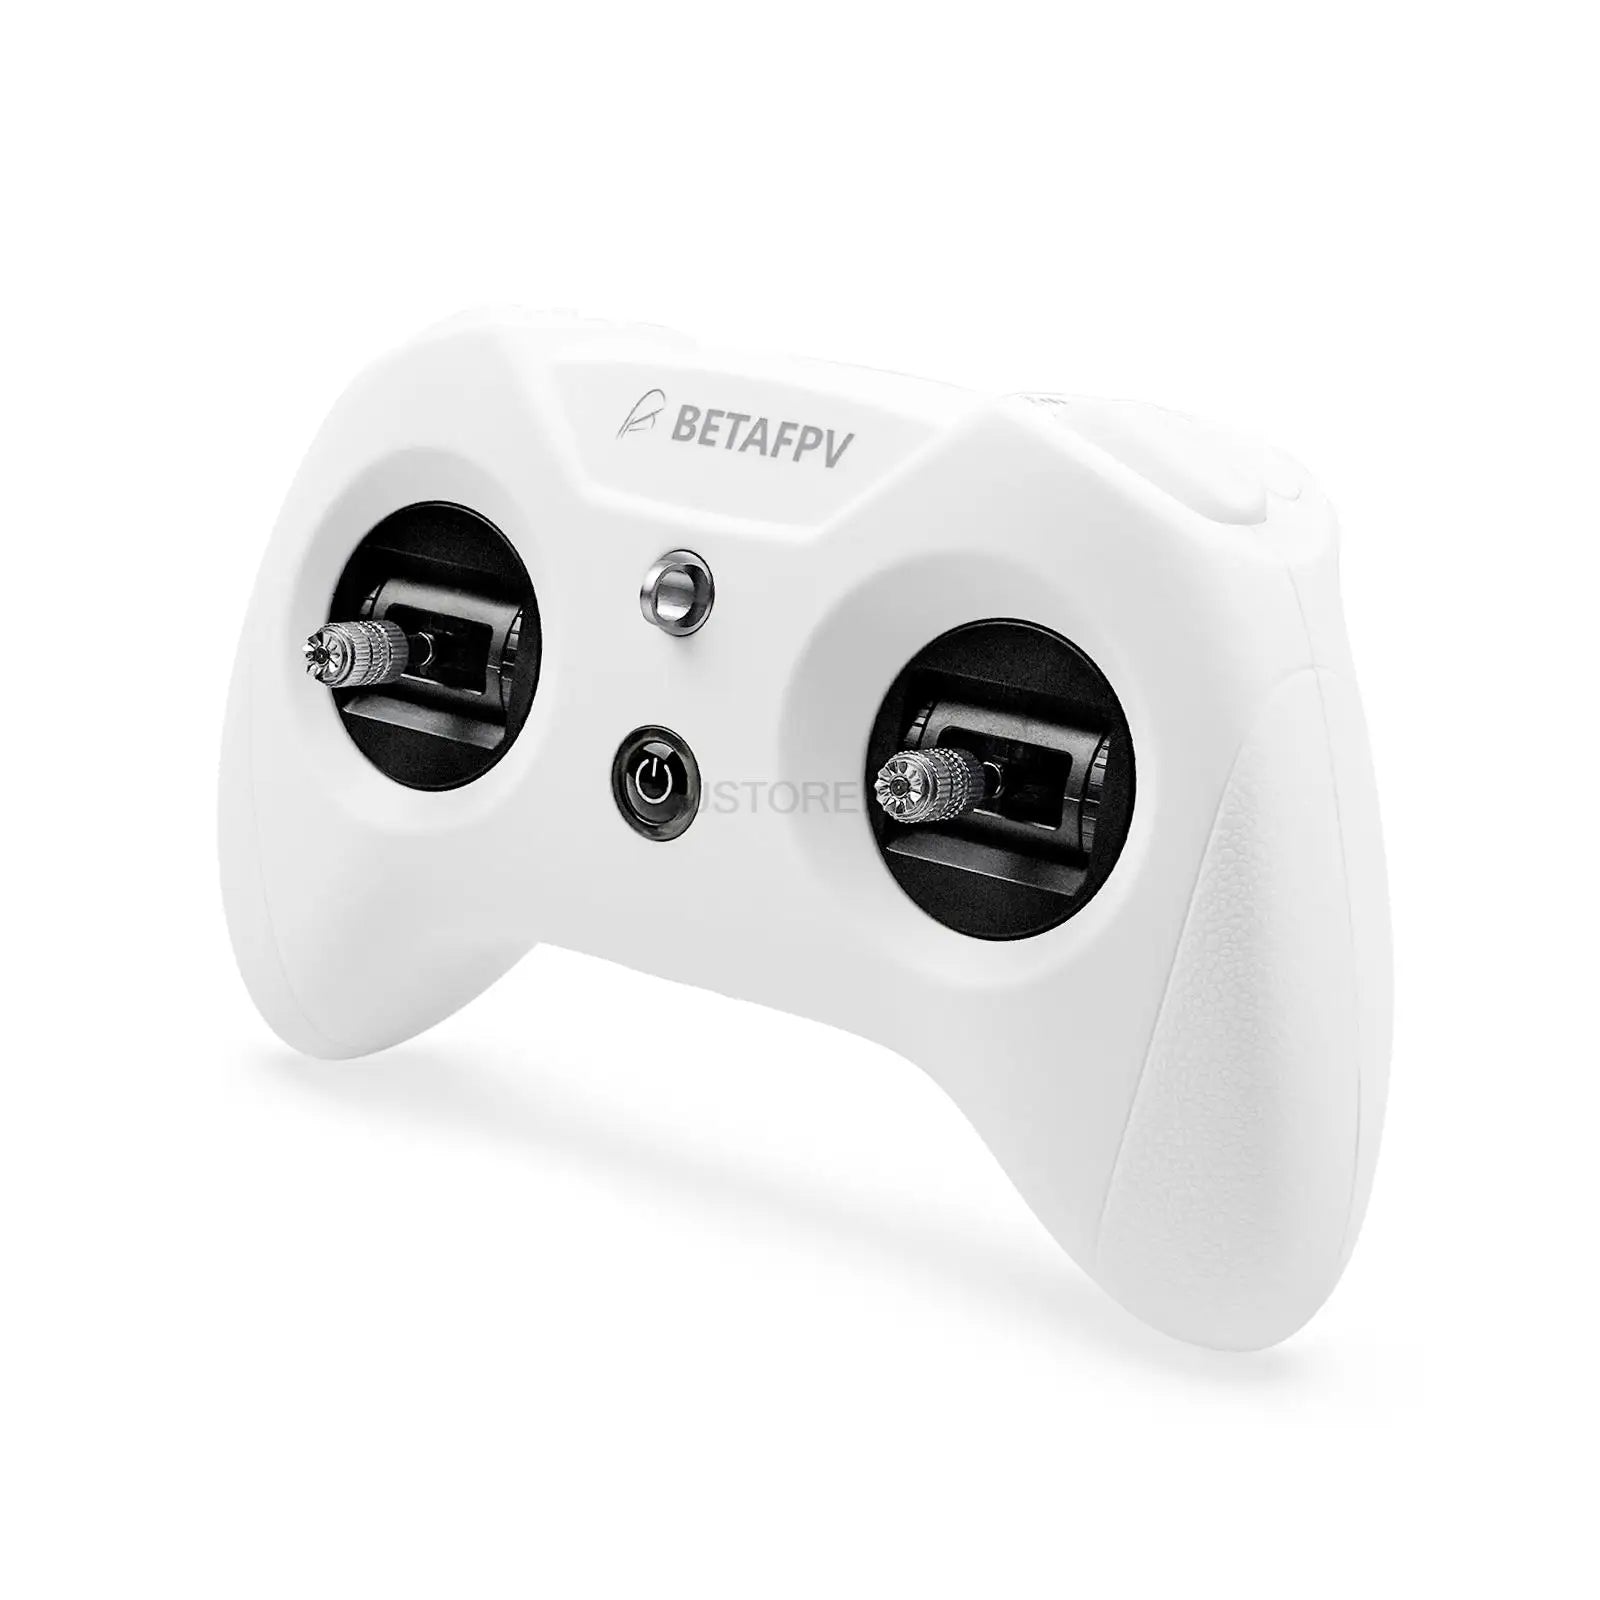 BETAFPV LiteRadio 3 Transmitter, LiteRadio 3 is ergonomic and has the shape of a gaming controller .